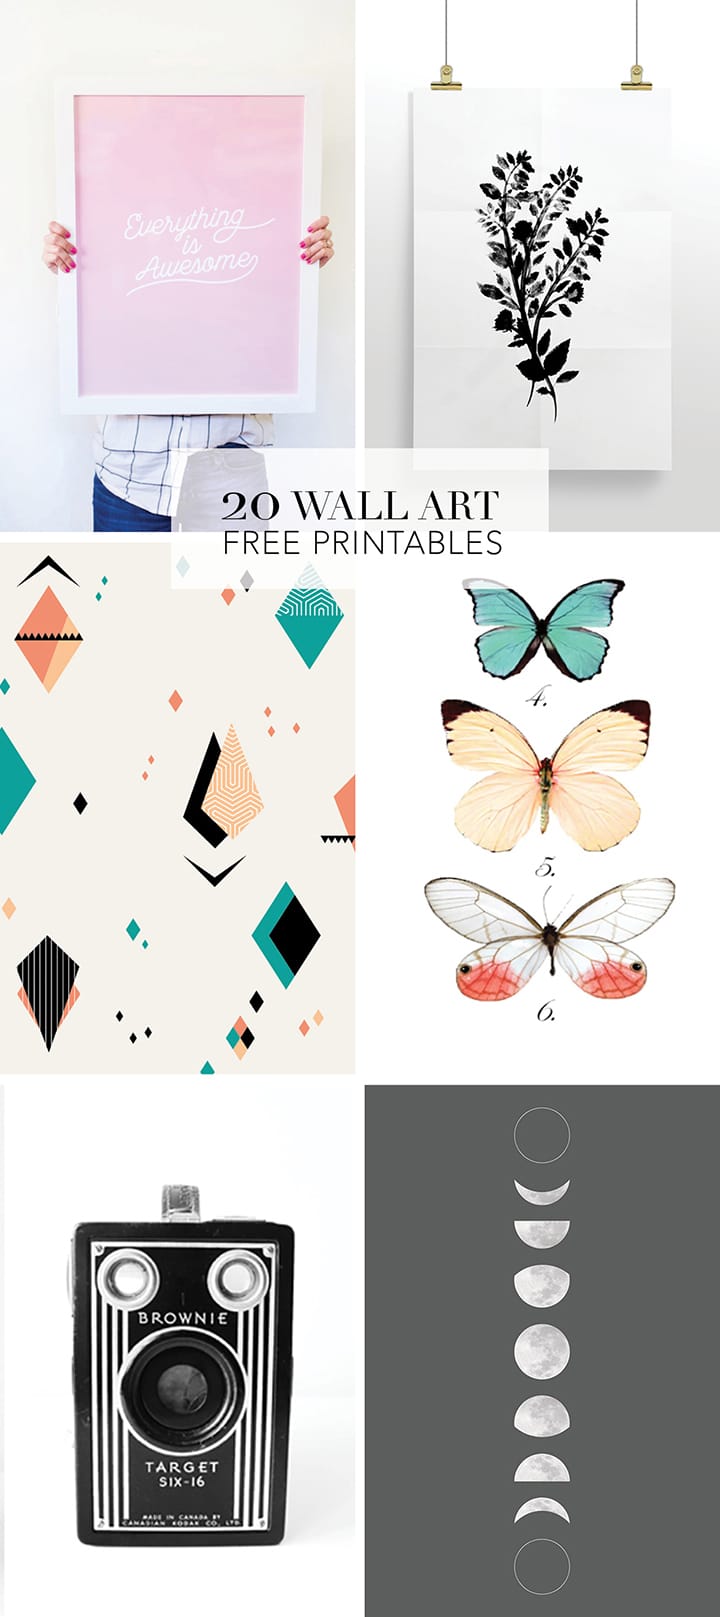 Decorate your walls without breaking the bank with these 20 Favorite Wall Art Printables